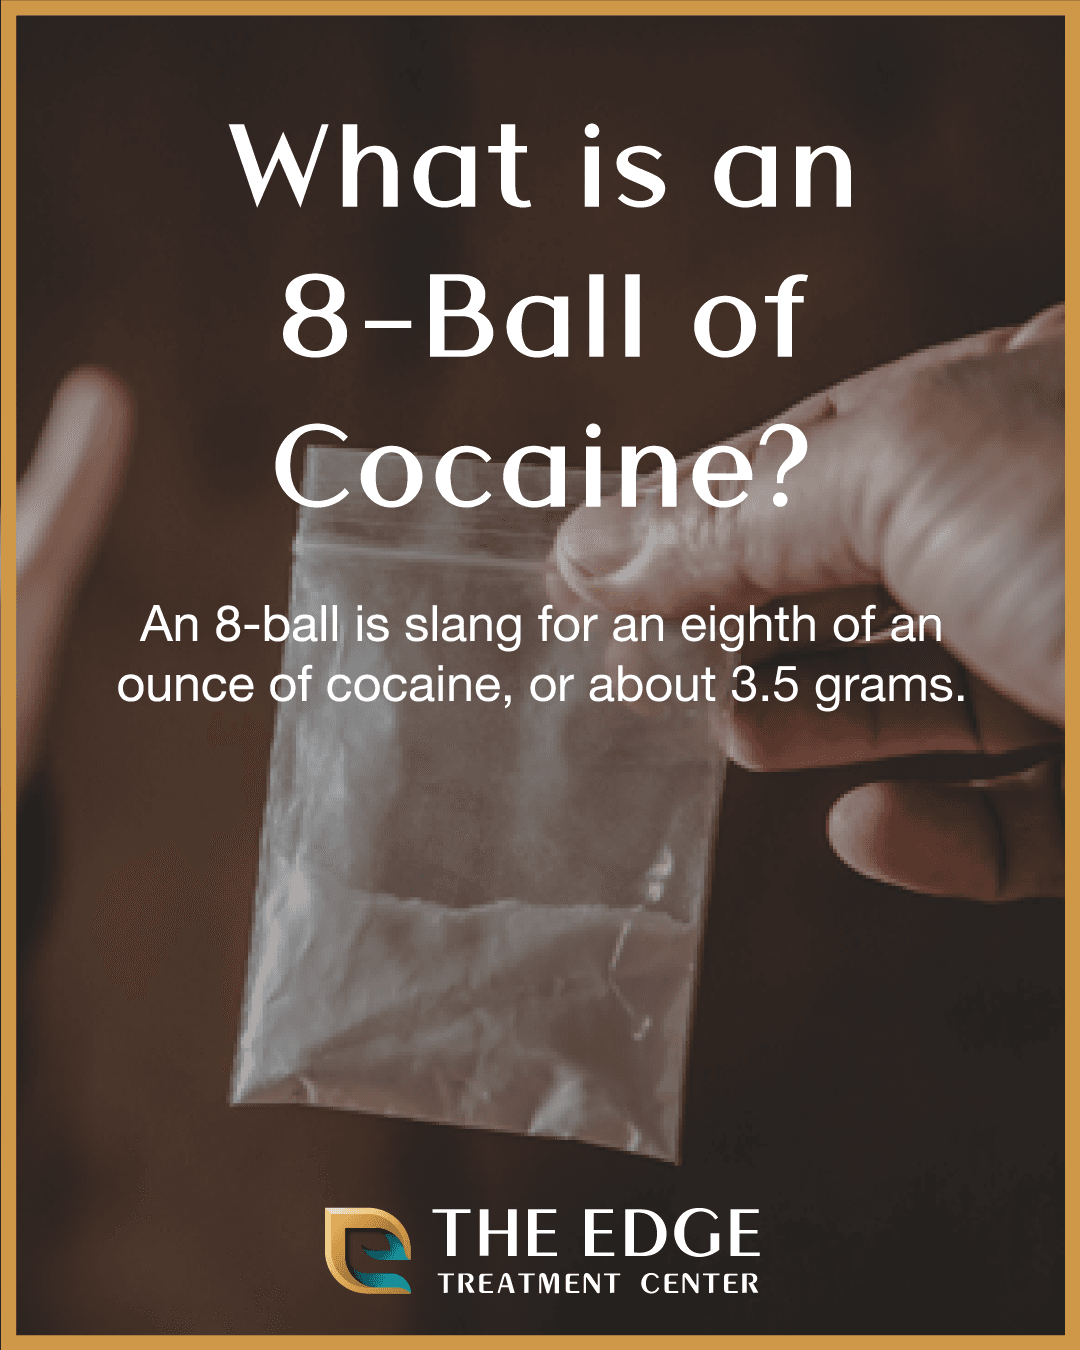 What's an 8-Ball of Cocaine?